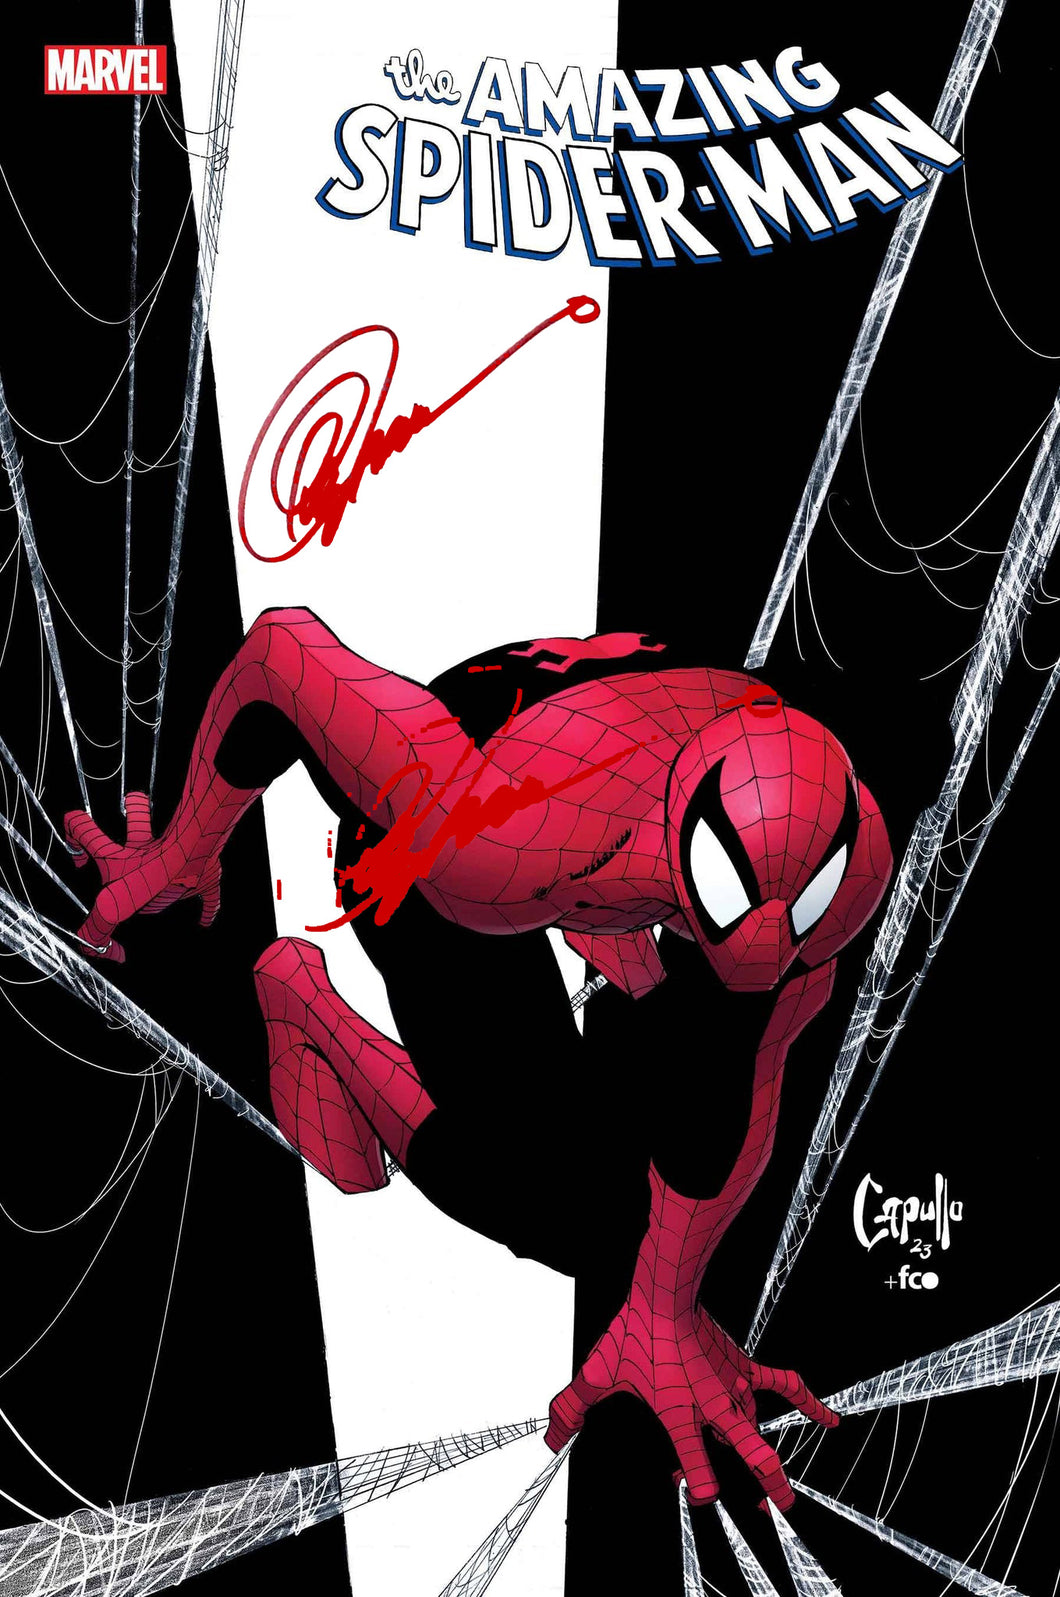 AMAZING SPIDER-MAN #50 GREG CAPULLO VARIANT - signed by Greg Capullo (graded & ungraded options available)